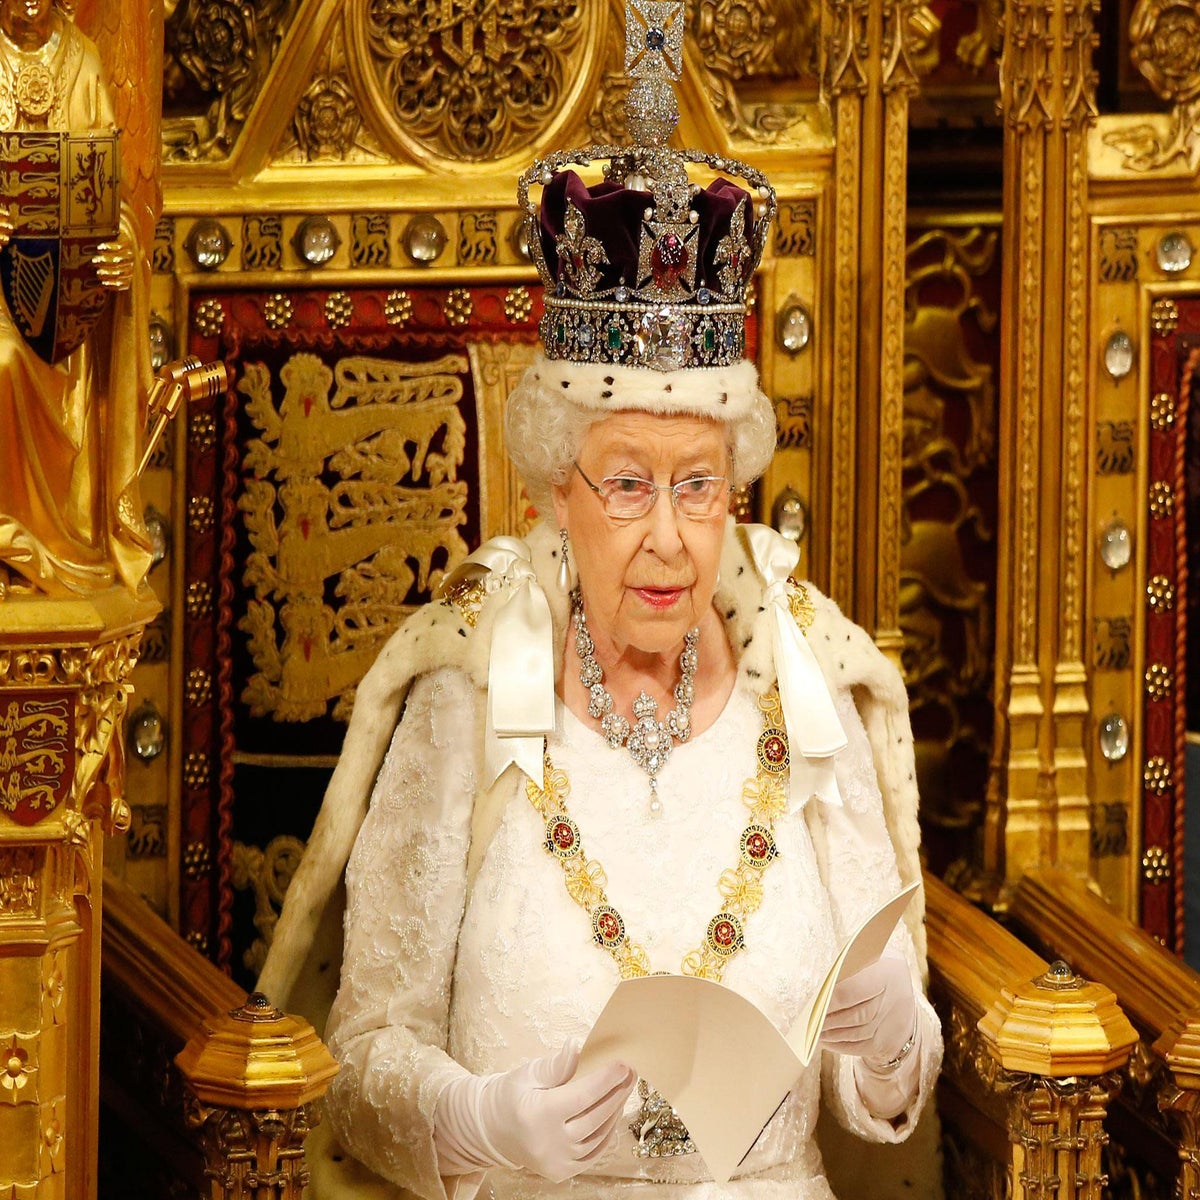 Queen's underwear supplier loses royal warrant after revealing